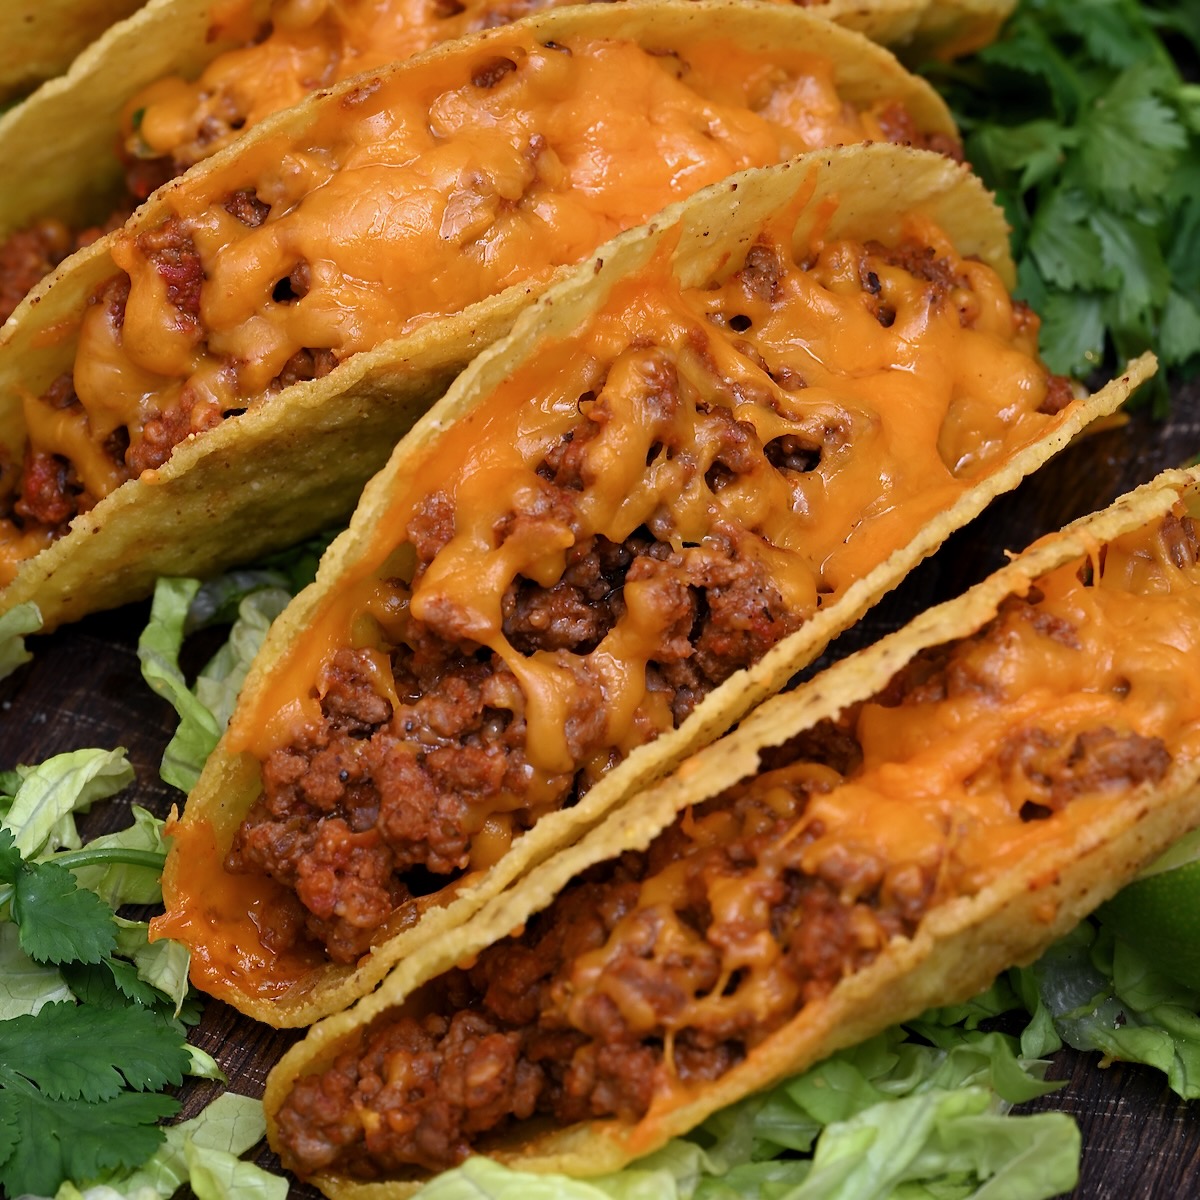 https://www.alphafoodie.com/wp-content/uploads/2023/01/Ground-Beef-Tacos-square.jpeg